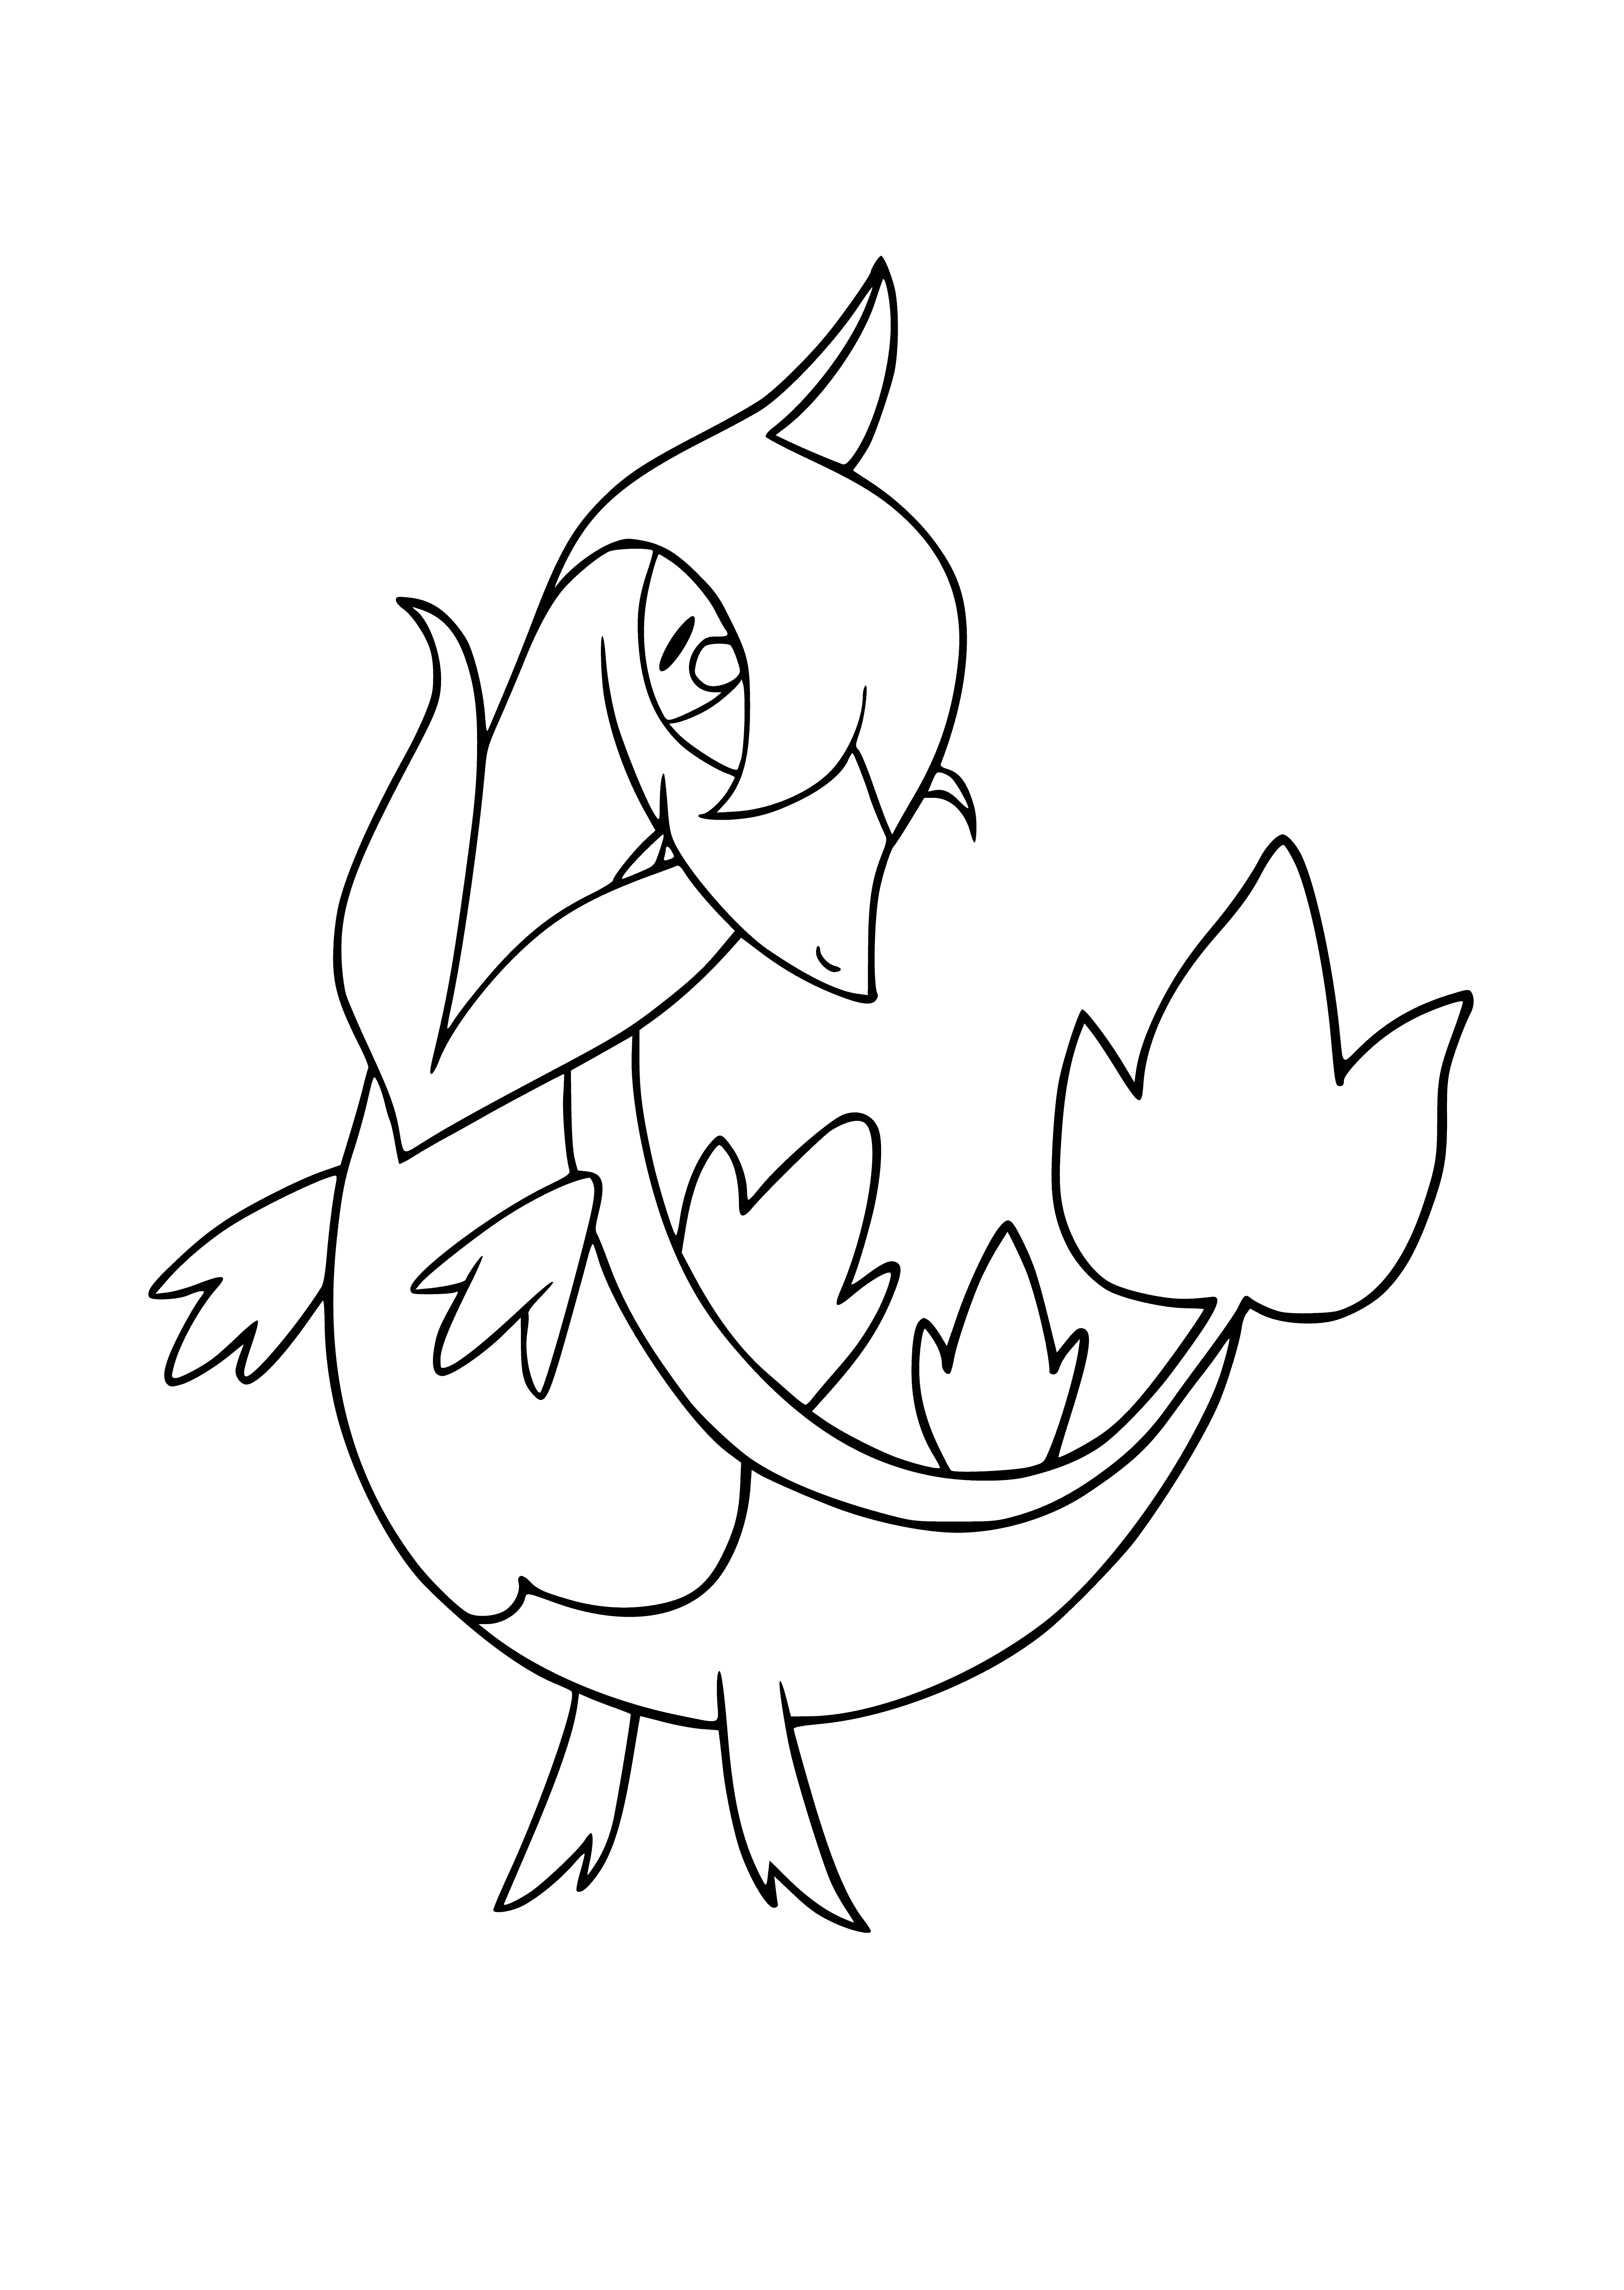 coloring page: Pokemon in evolution process seen in coloring page; green & snake-like, brown head and two spots on back.